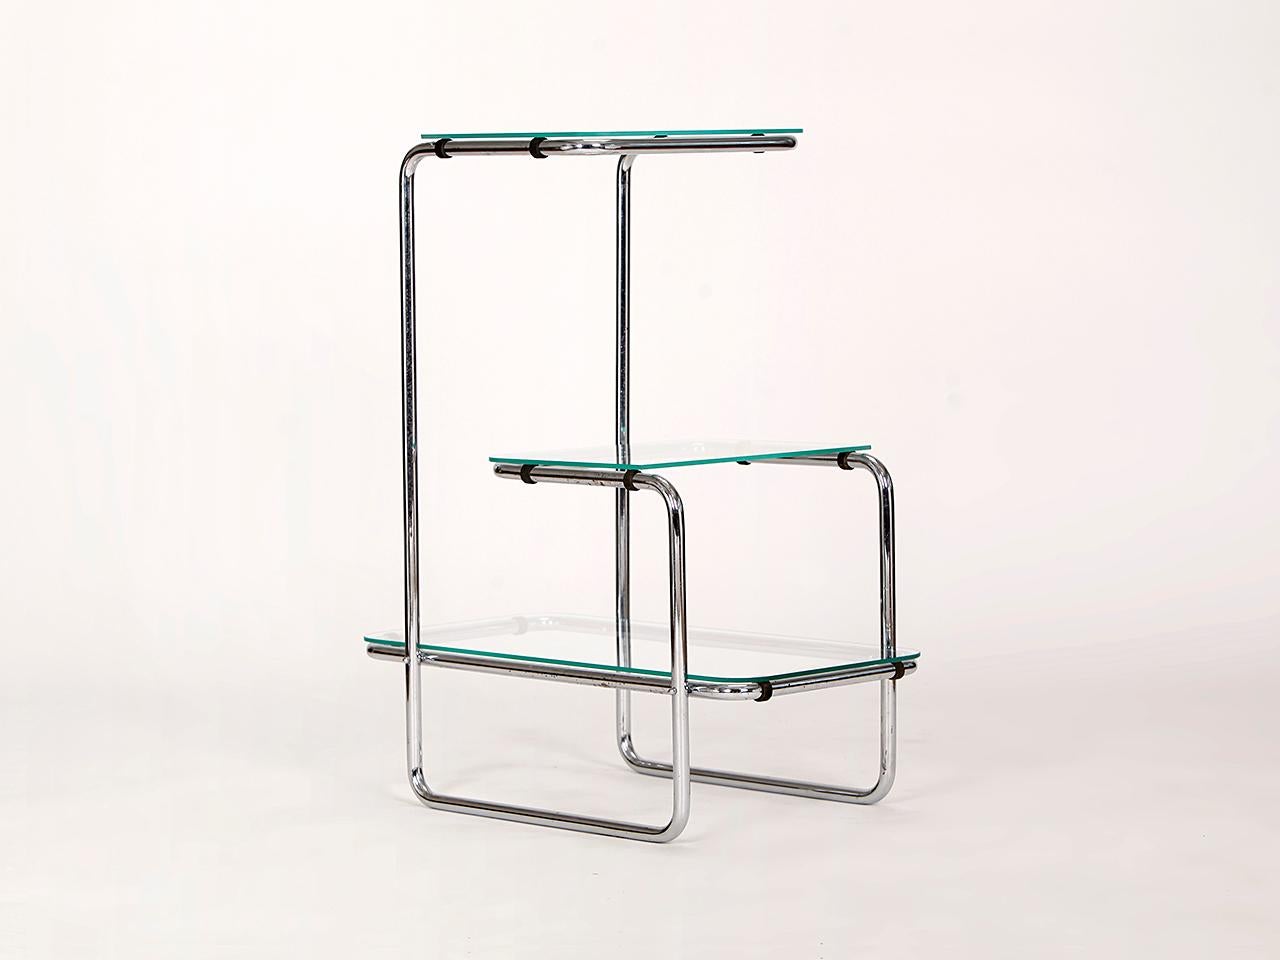 This étagère was designed by Emile Guyot in the 1920s for Thonet. This edition was produced by Mücke-Melder / Frystat in the 1930s under license. It features its original chrome and rubber mounts. This piece has a production mark of the